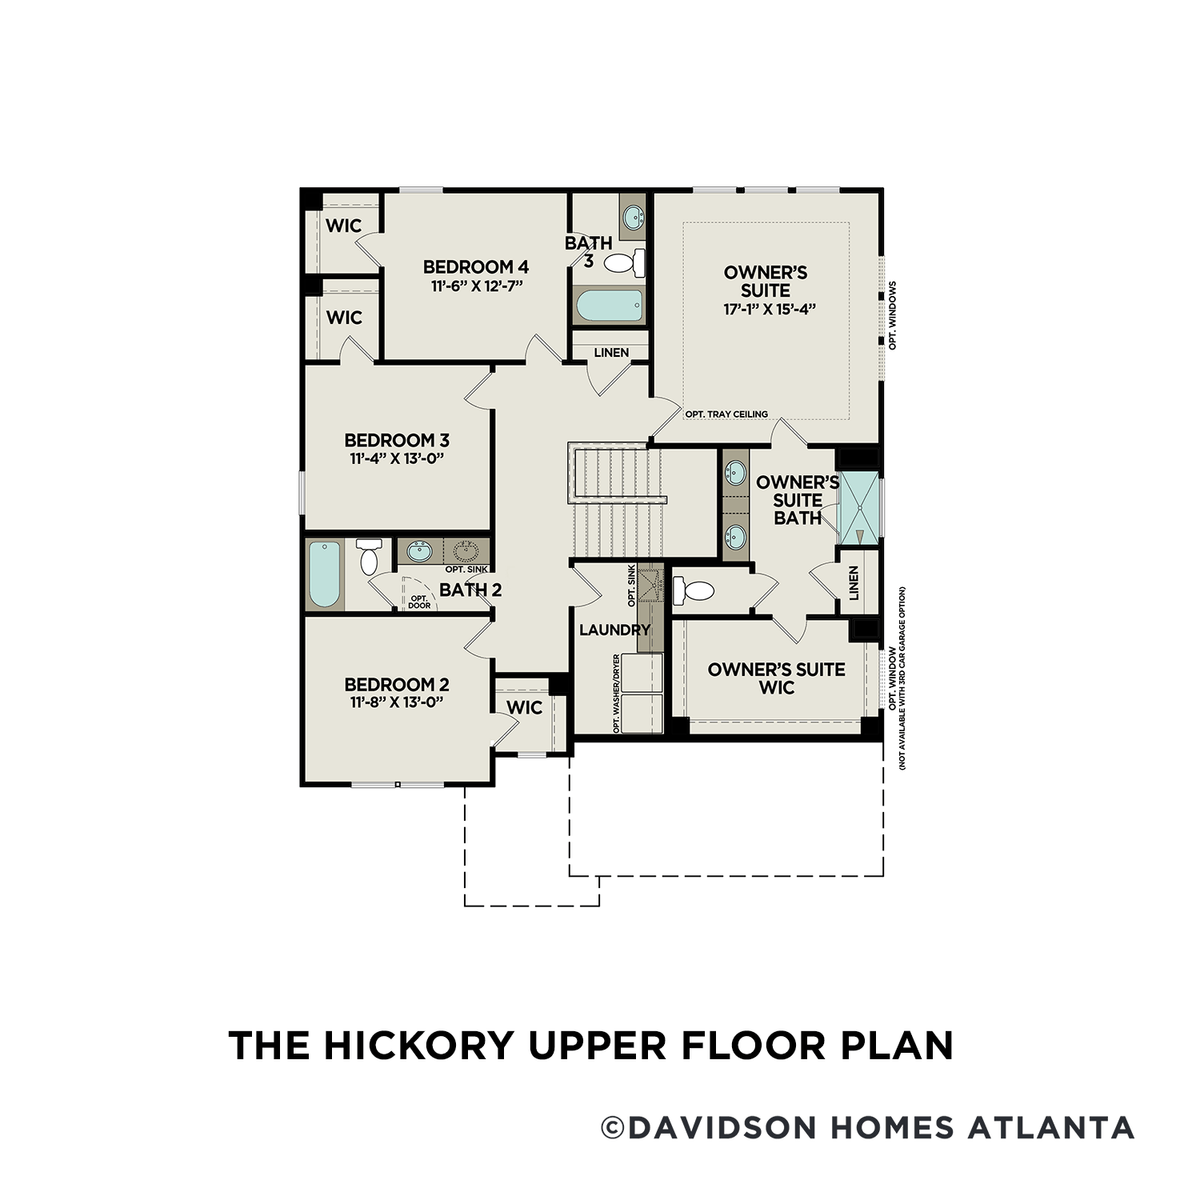 2 - The Hickory B- Unfinished Basement  floor plan layout for 93 Laurelwood Lane in Davidson Homes' Riverwood community.